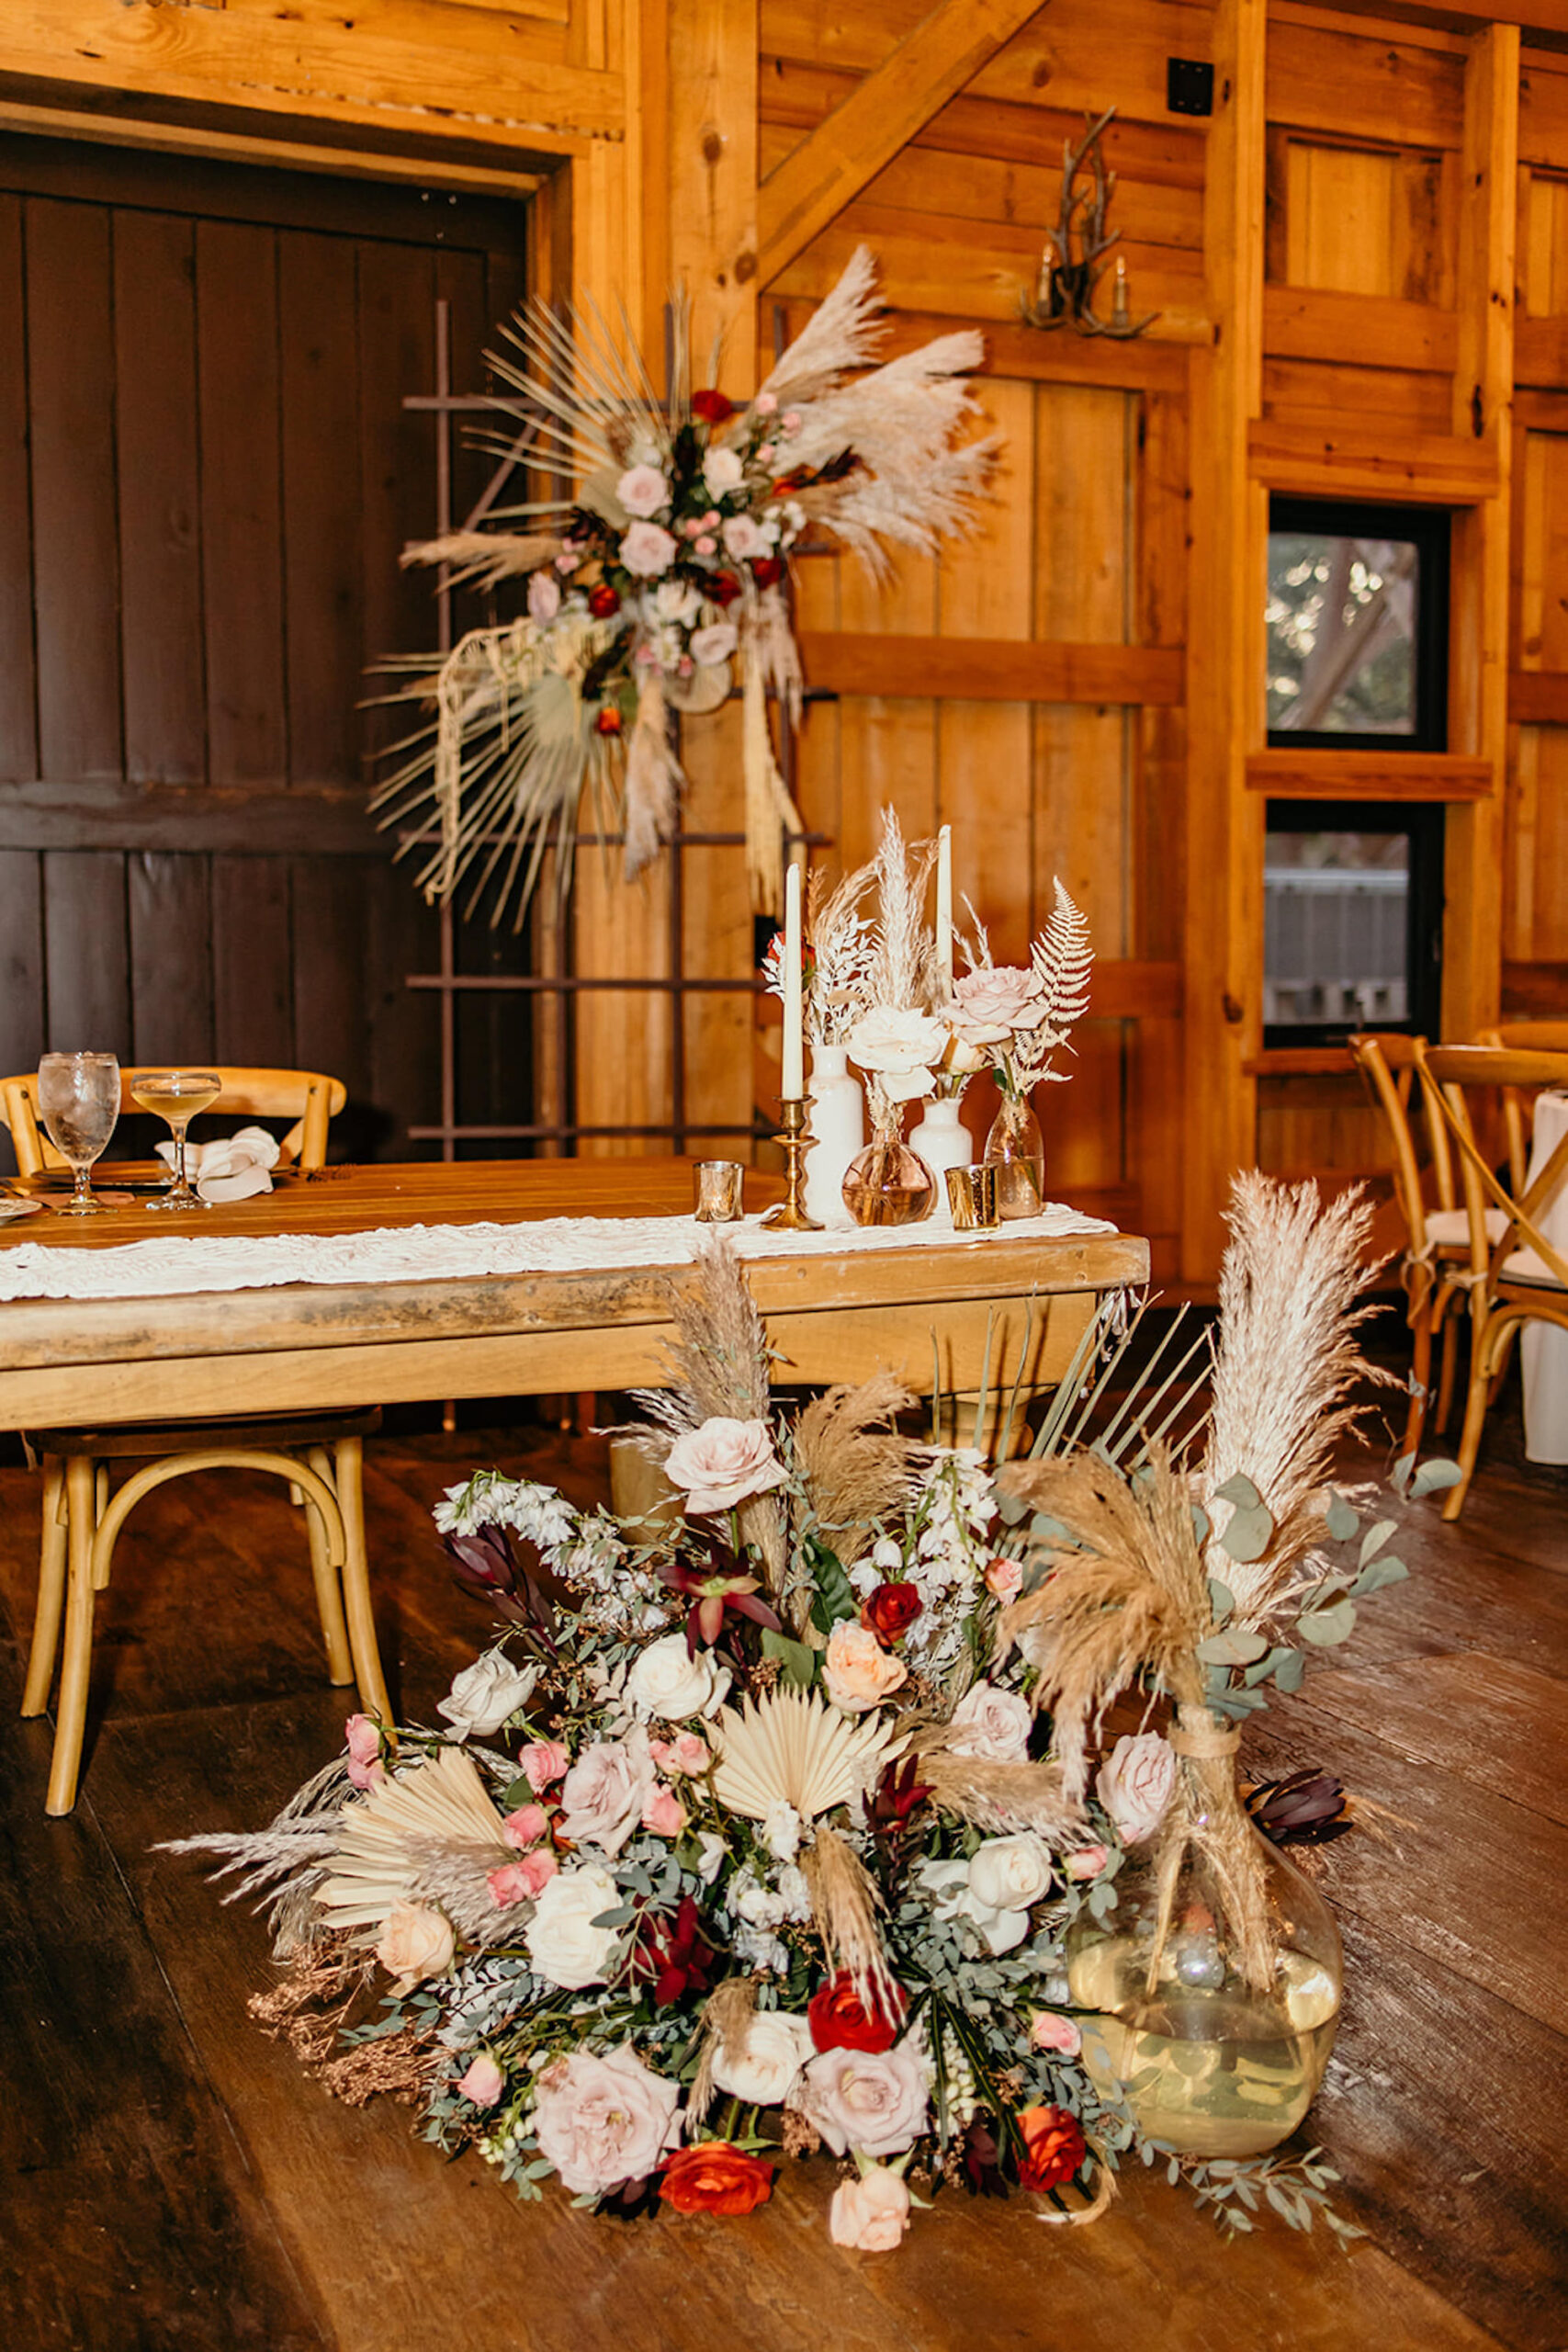 Boho Sweetheart Table Flower Inspiration | Fern, Pampas Grass, Palm Leaves, Eucalyptus, and Roses Floor and Backdrop Floral Arrangements | Tampa Bay Florist Save The Date Florida